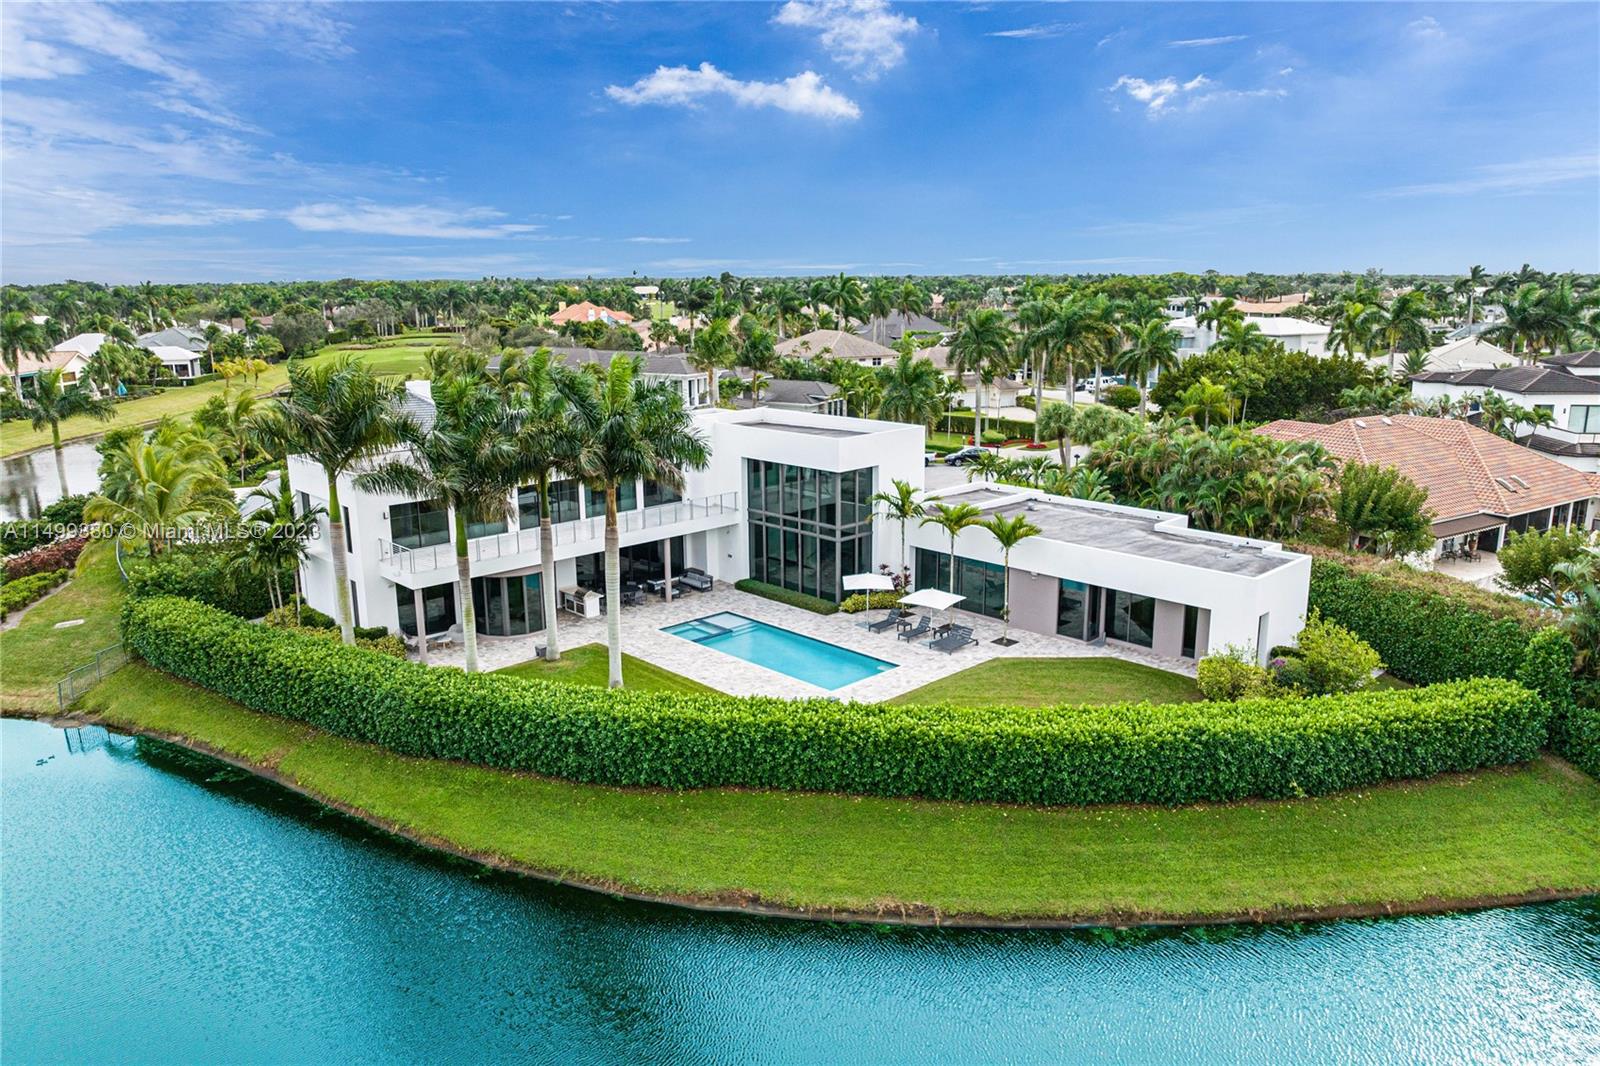 7677 Stonehaven Ln, Boca Raton, FL, 33496 United States, 5 Bedrooms Bedrooms, ,7 BathroomsBathrooms,Residential,For Sale,Stonehaven Ln,A11499380